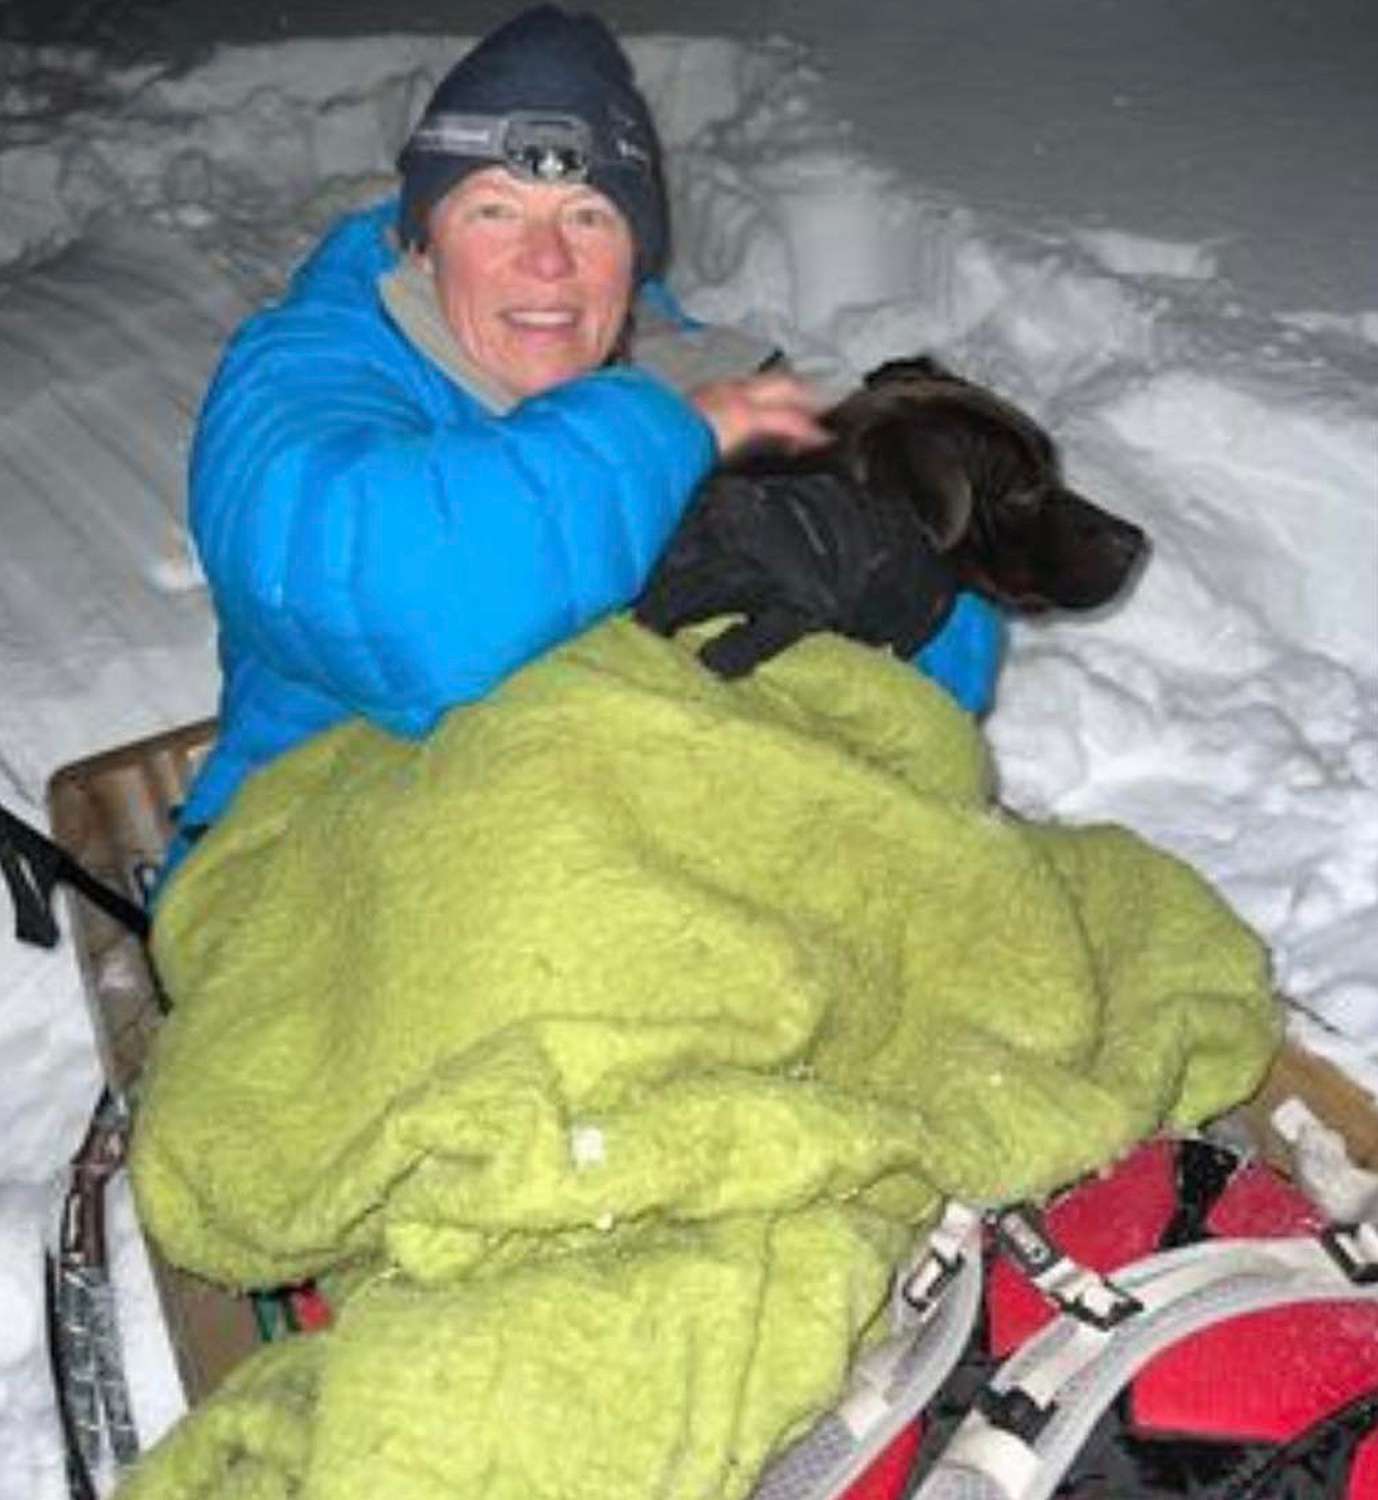 Rescuers Find Dog Missing Since August Buried Beneath Snow | PEOPLE.com